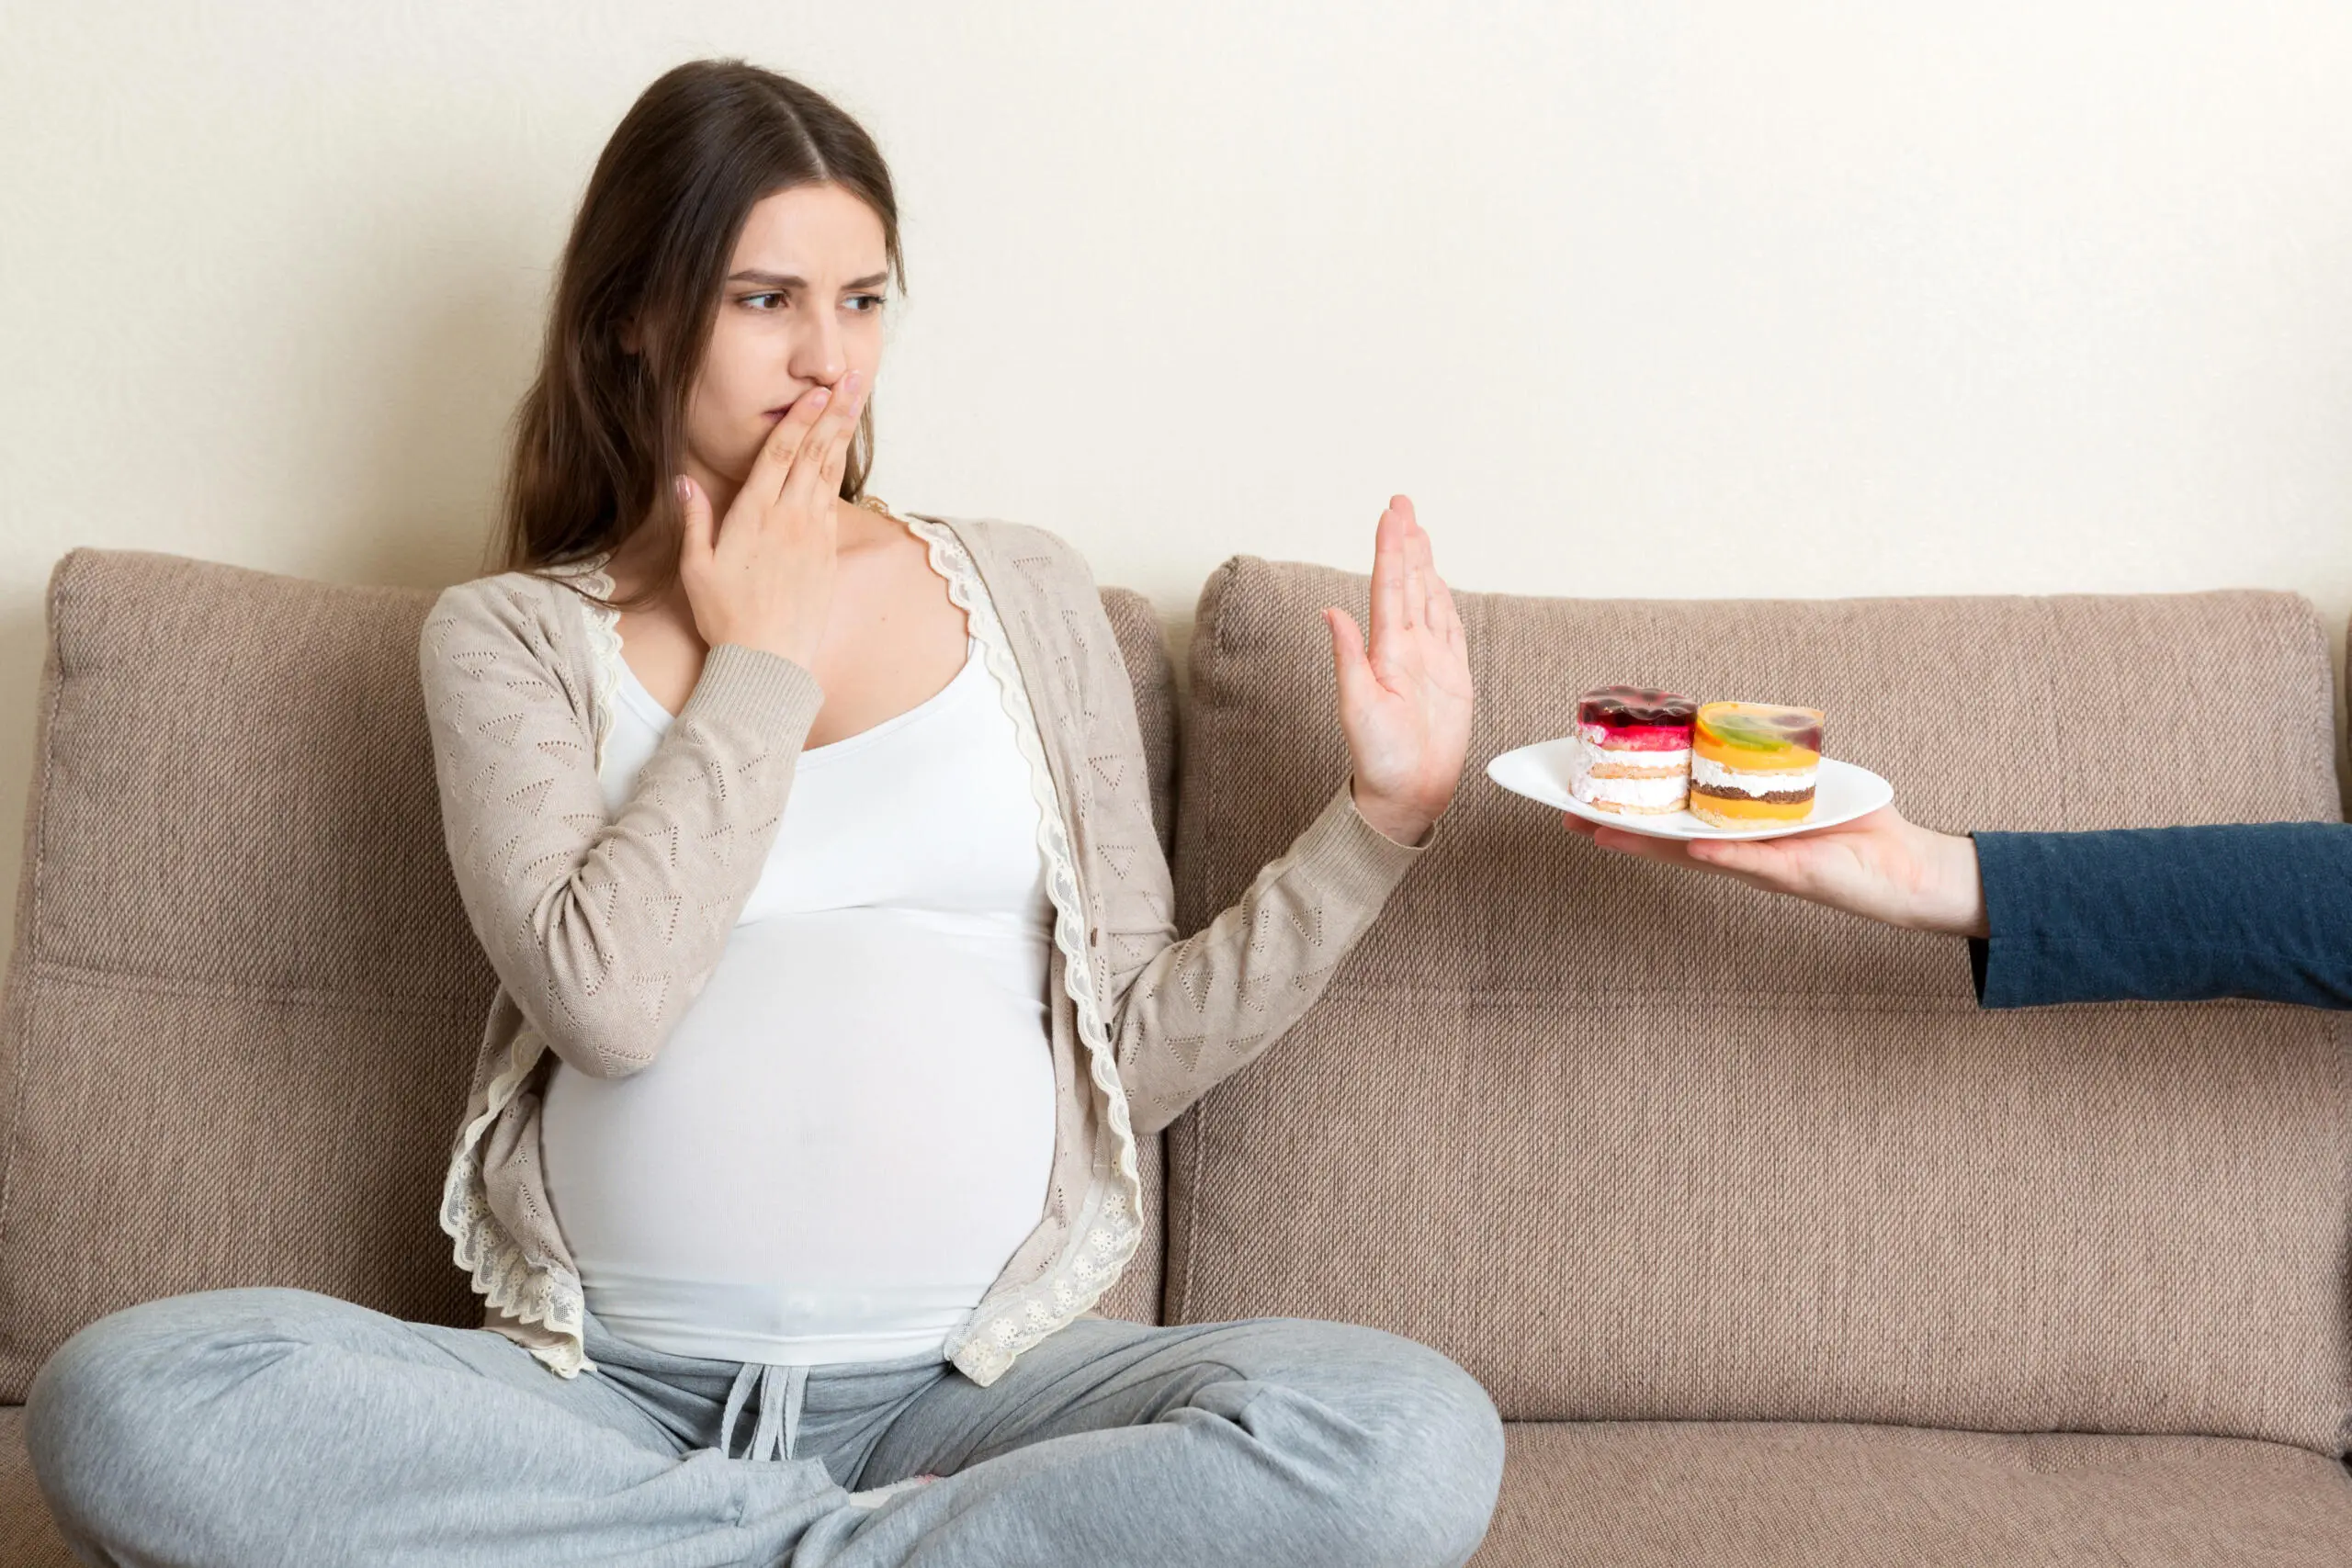 Here’s Why You Should Avoid the Following Foods During Pregnancy